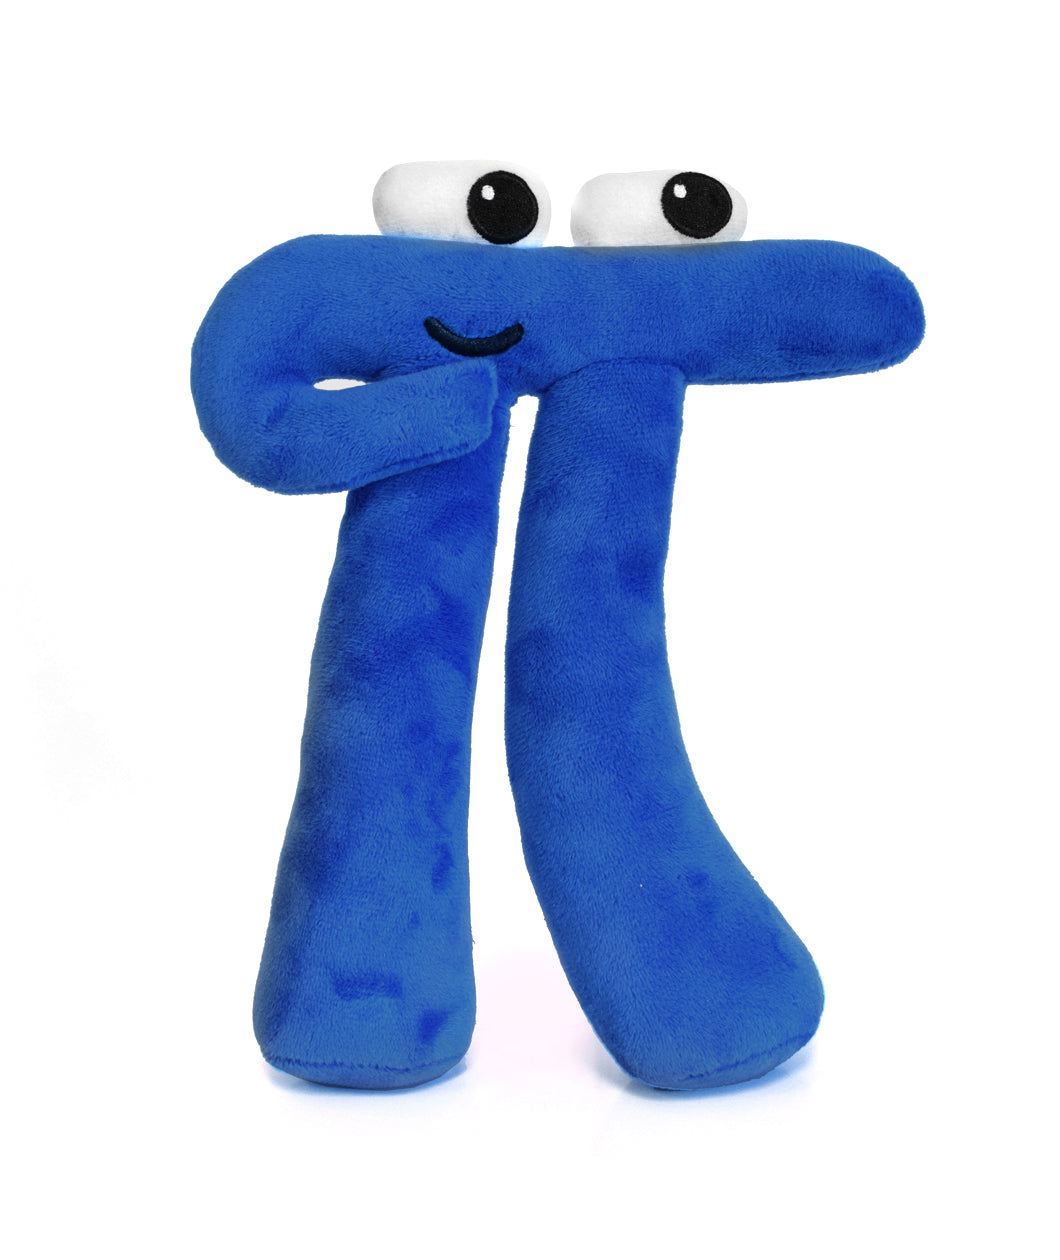 A blue pi with long legs, a small black smile and two white oval eyes with black irises on the top of the plushie - from 3Blue1Brown.